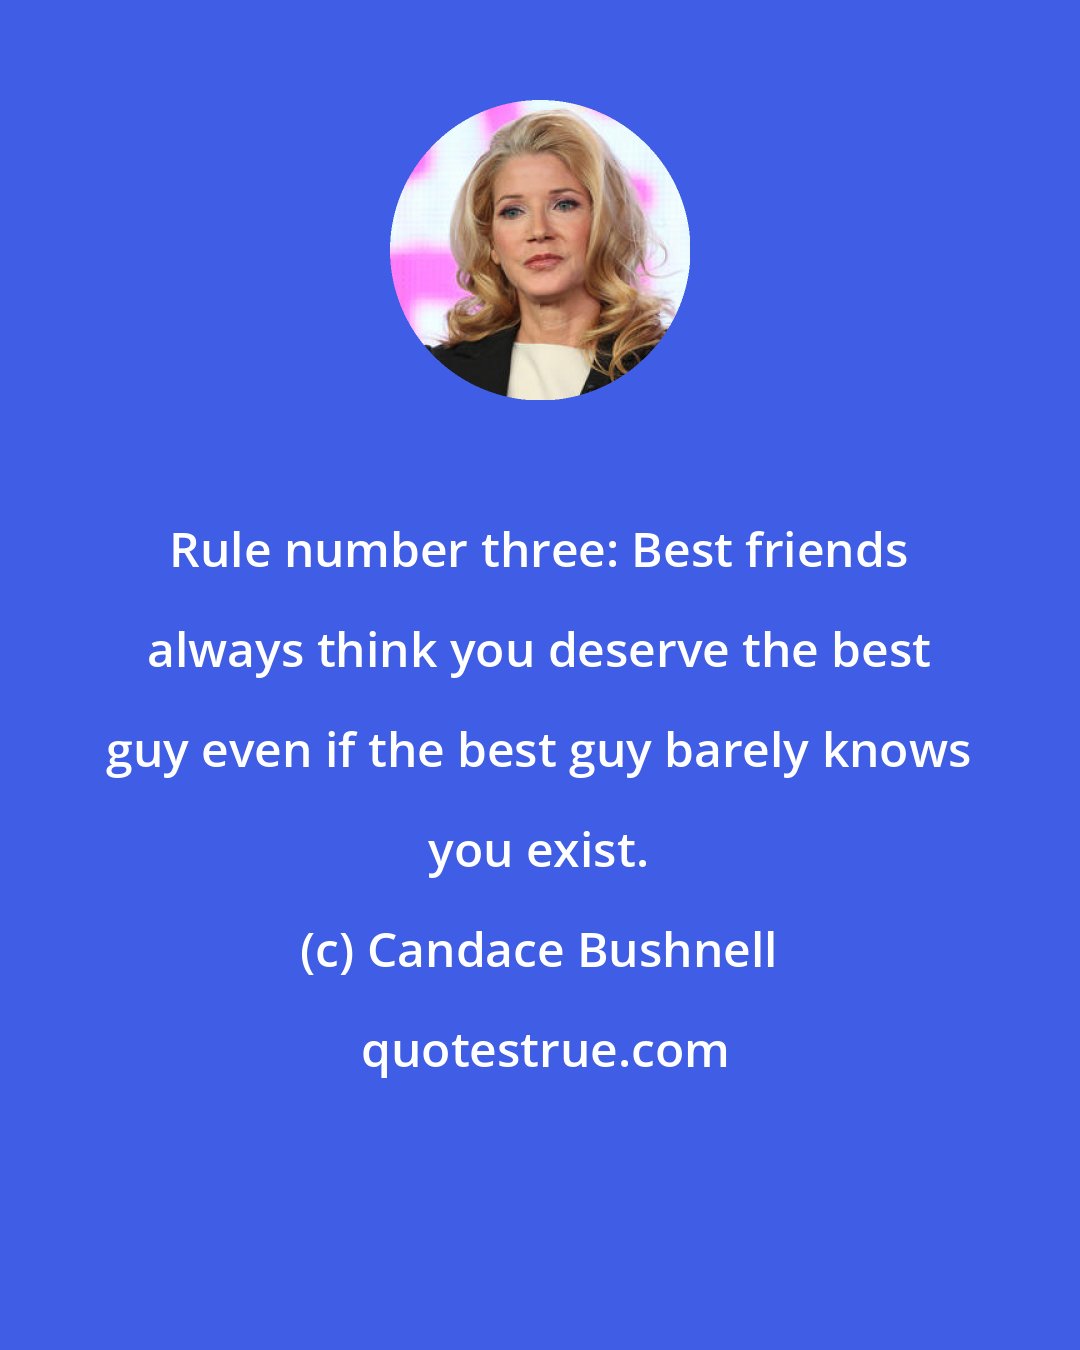 Candace Bushnell: Rule number three: Best friends always think you deserve the best guy even if the best guy barely knows you exist.